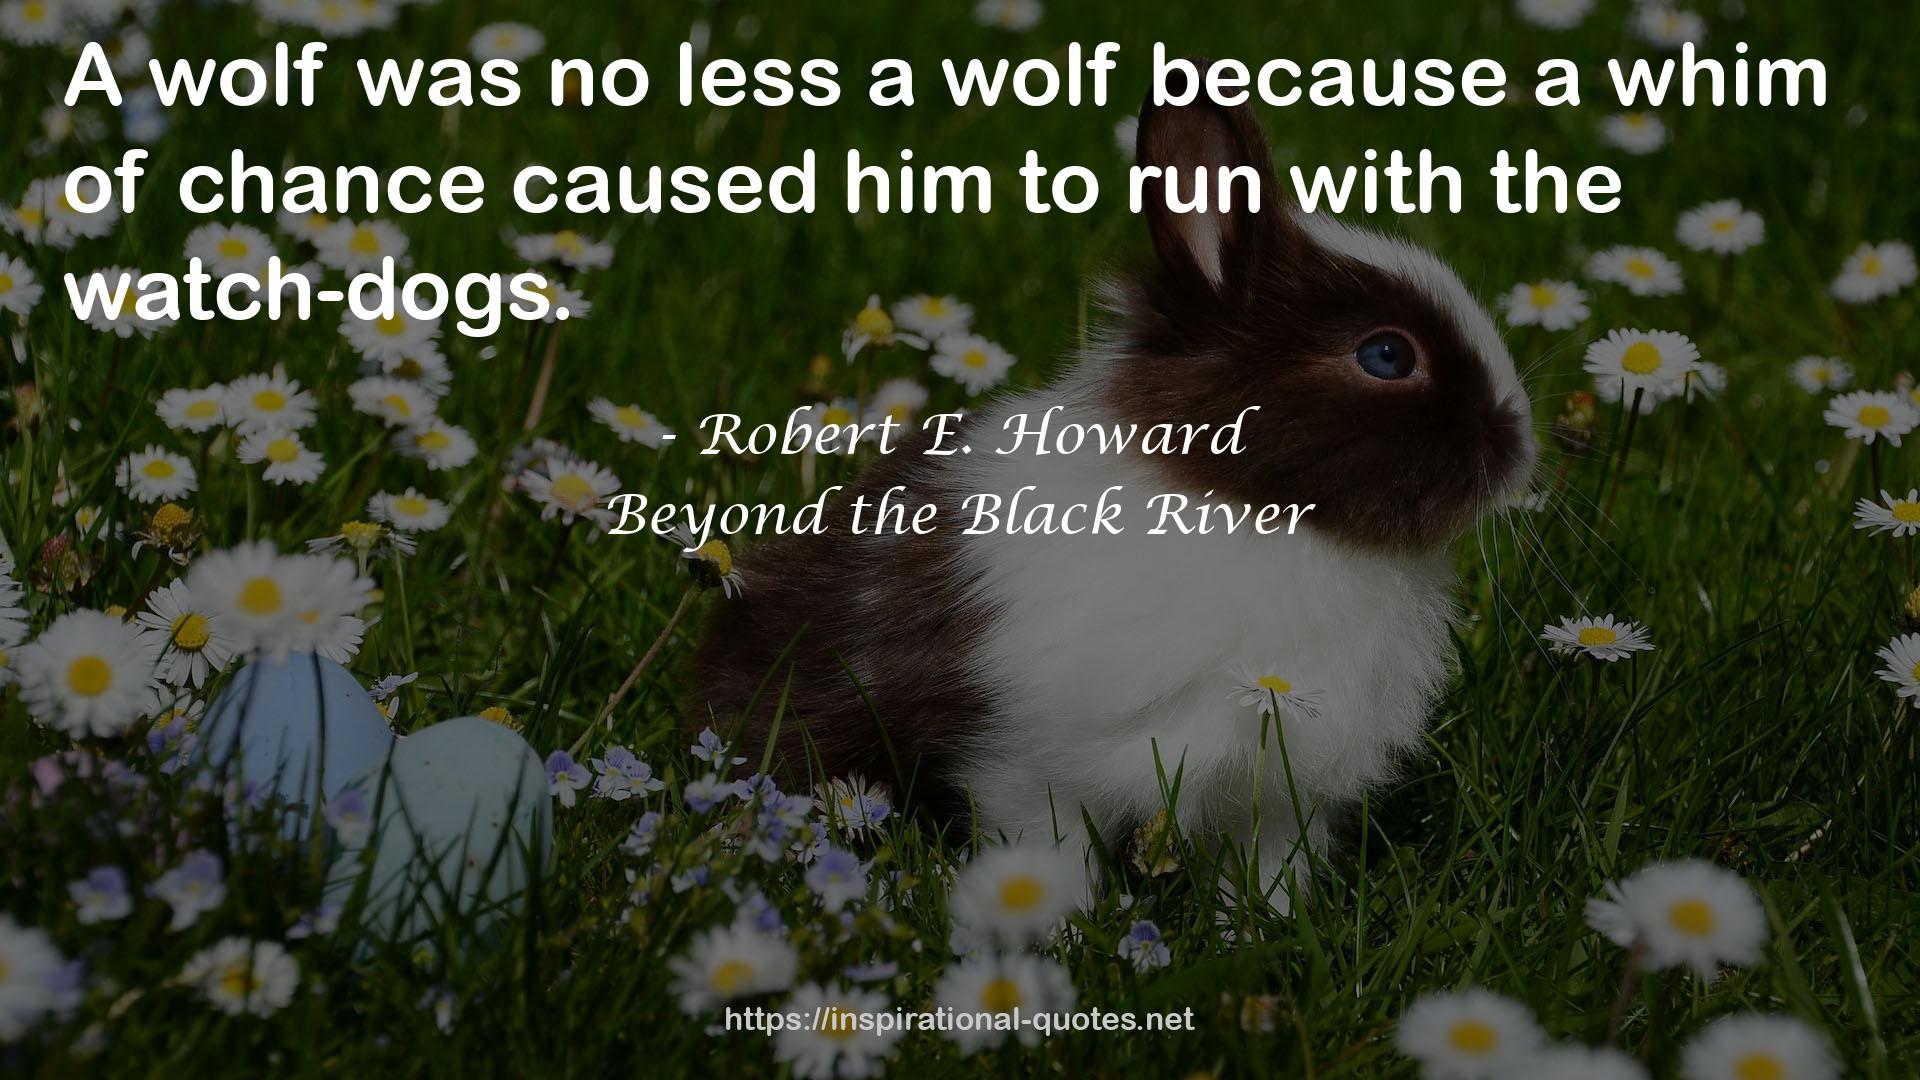 Beyond the Black River QUOTES